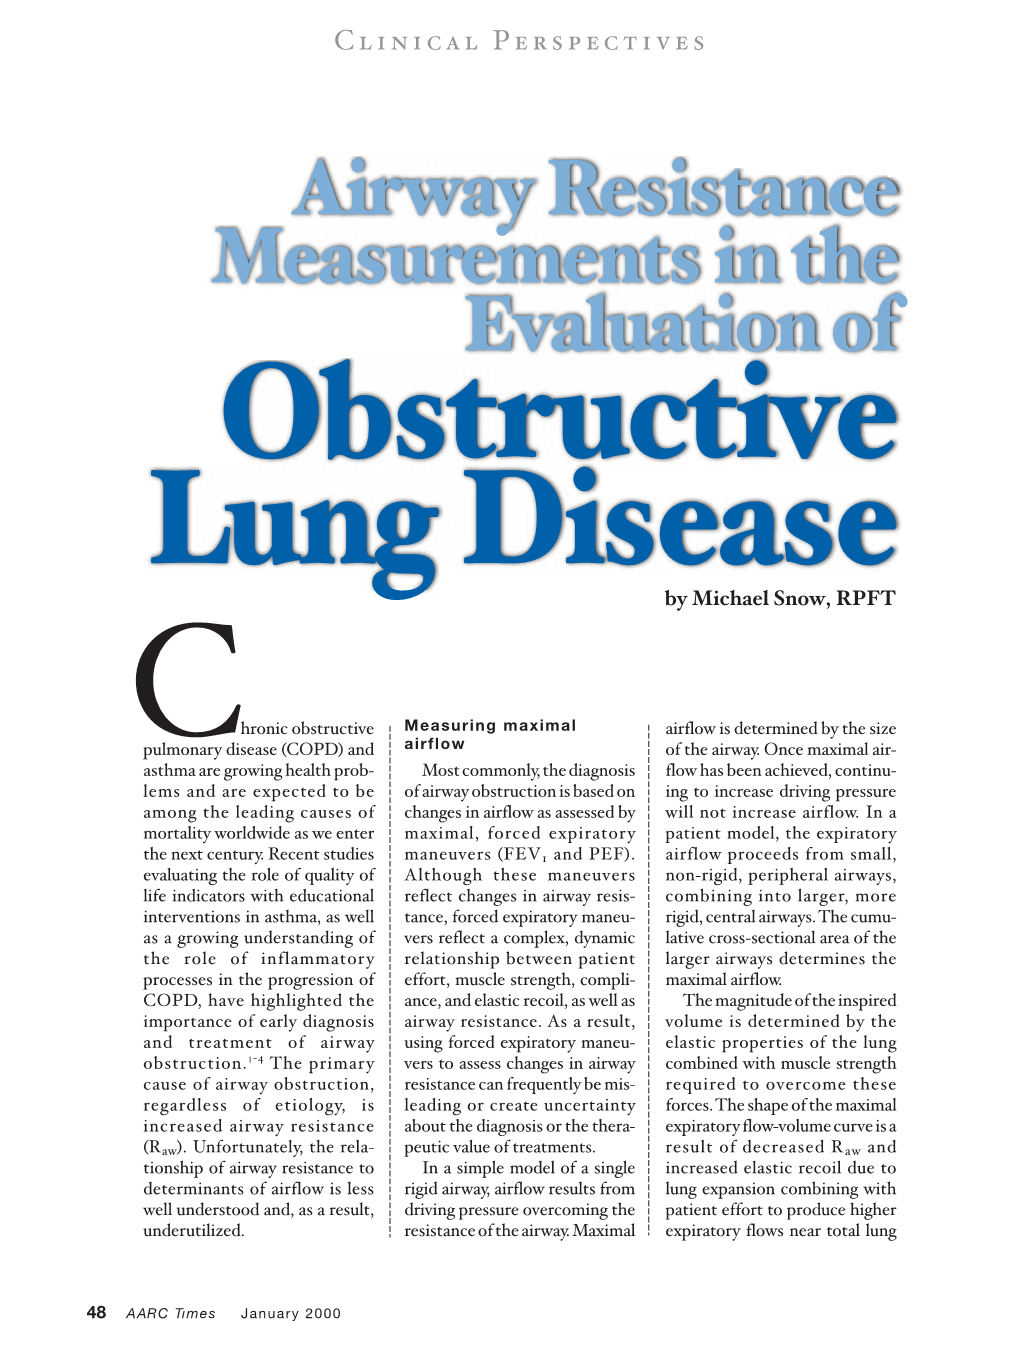 Airway Resistance Measurements in the Evaluation of Obstructive Lung Disease by Michael Snow, RPFT